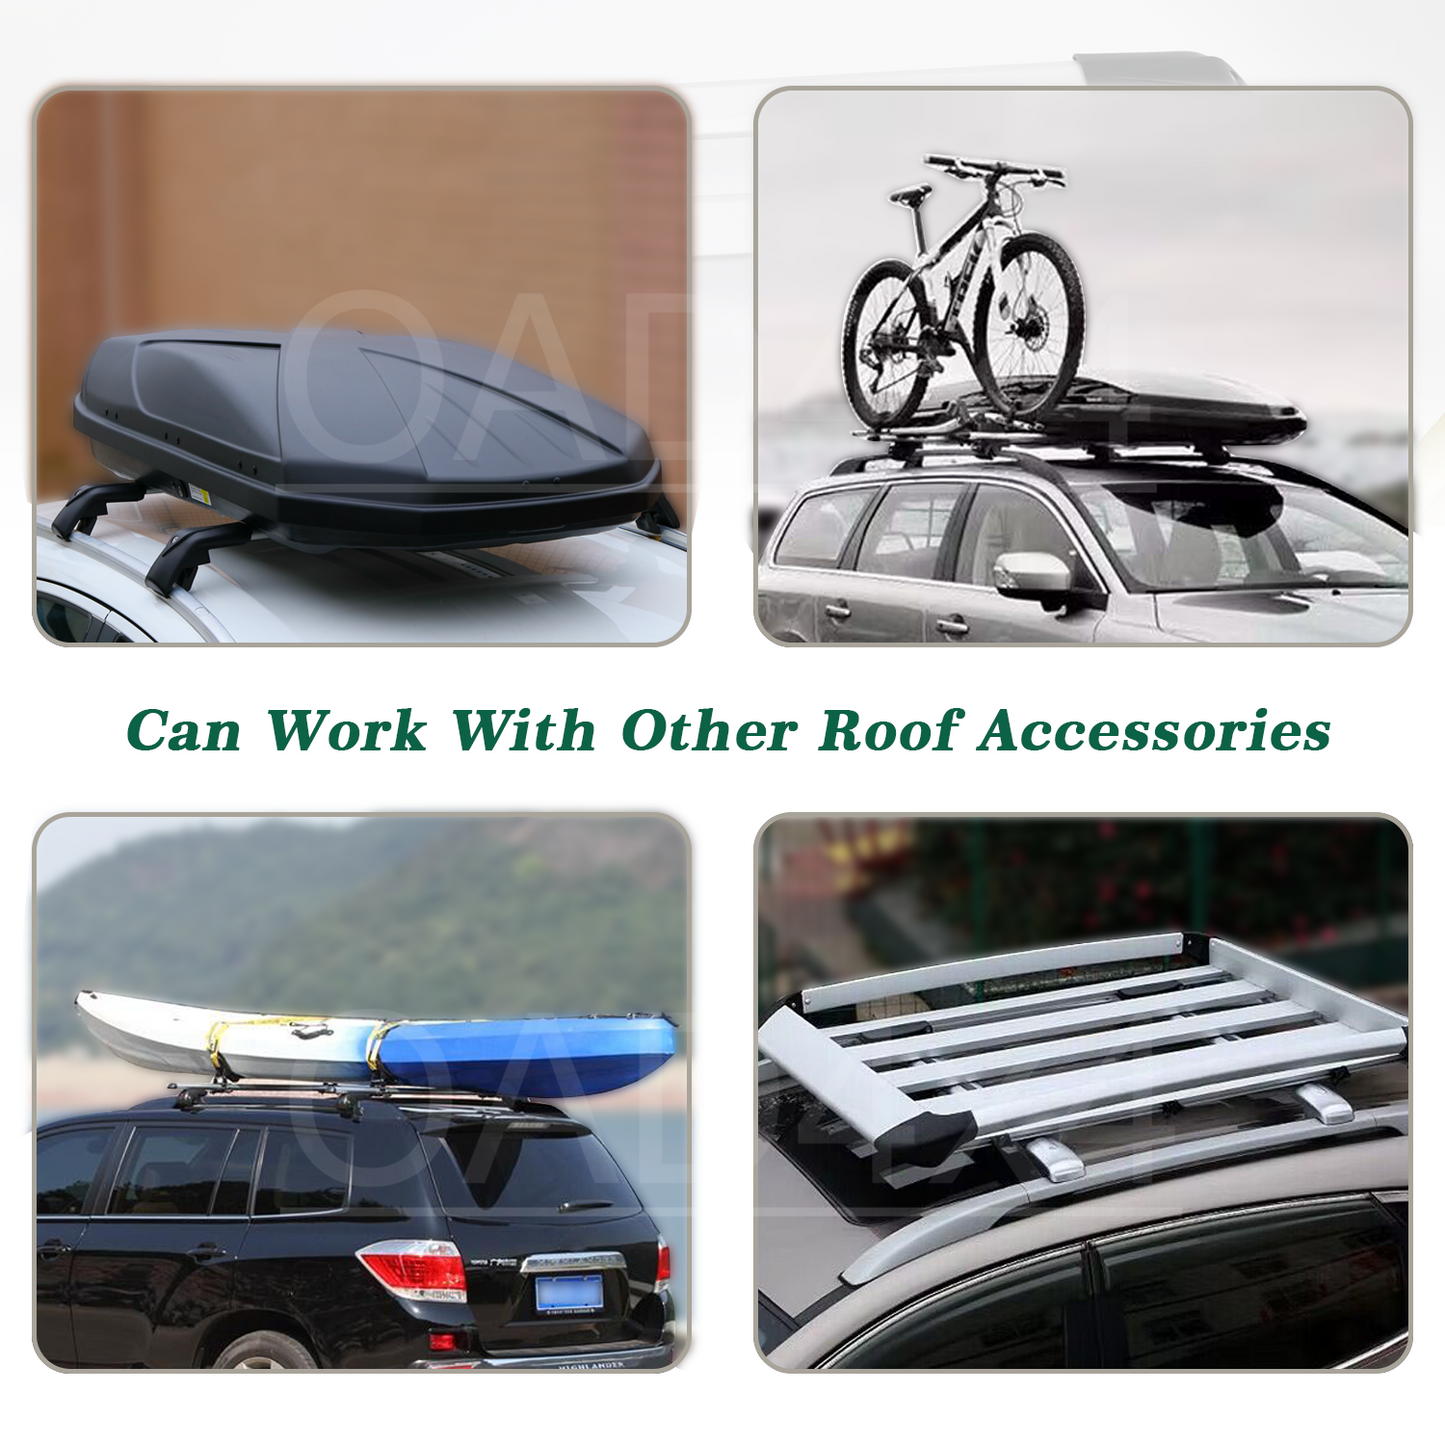 OAD 1 Pair Aluminum Silver Cross Bar Roof Racks Baggage holder for KIA Grand carnival 06-14 with raised roof rail